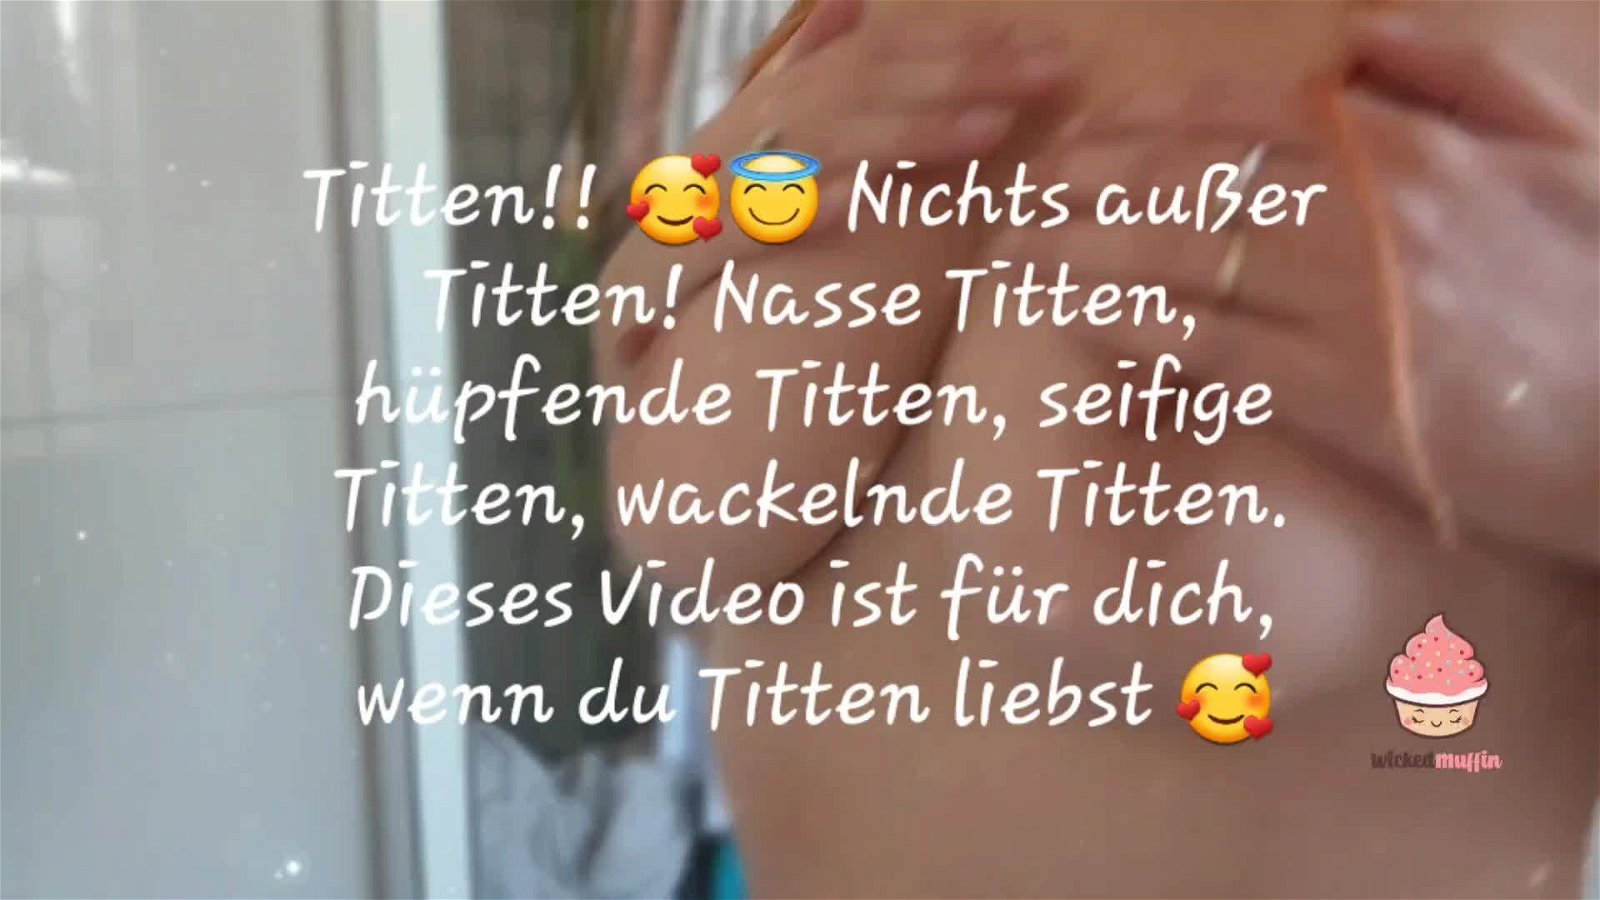 Video by wickedmuffinsub with the username @wickedmuffinsub, who is a star user,  March 30, 2023 at 12:48 PM and the text says 'Tits!! 🥰😇 Nothing but wet tits, jumping tits, soapy 🧼 tits, wiggling Tits, squeezing Tits. This video is for you if you love Boobs 🥰😍

Full Video available here:
https://onlyfans.com/?ref=151031487
https://bestfans.com/thewickedmuffin

folllow my..'